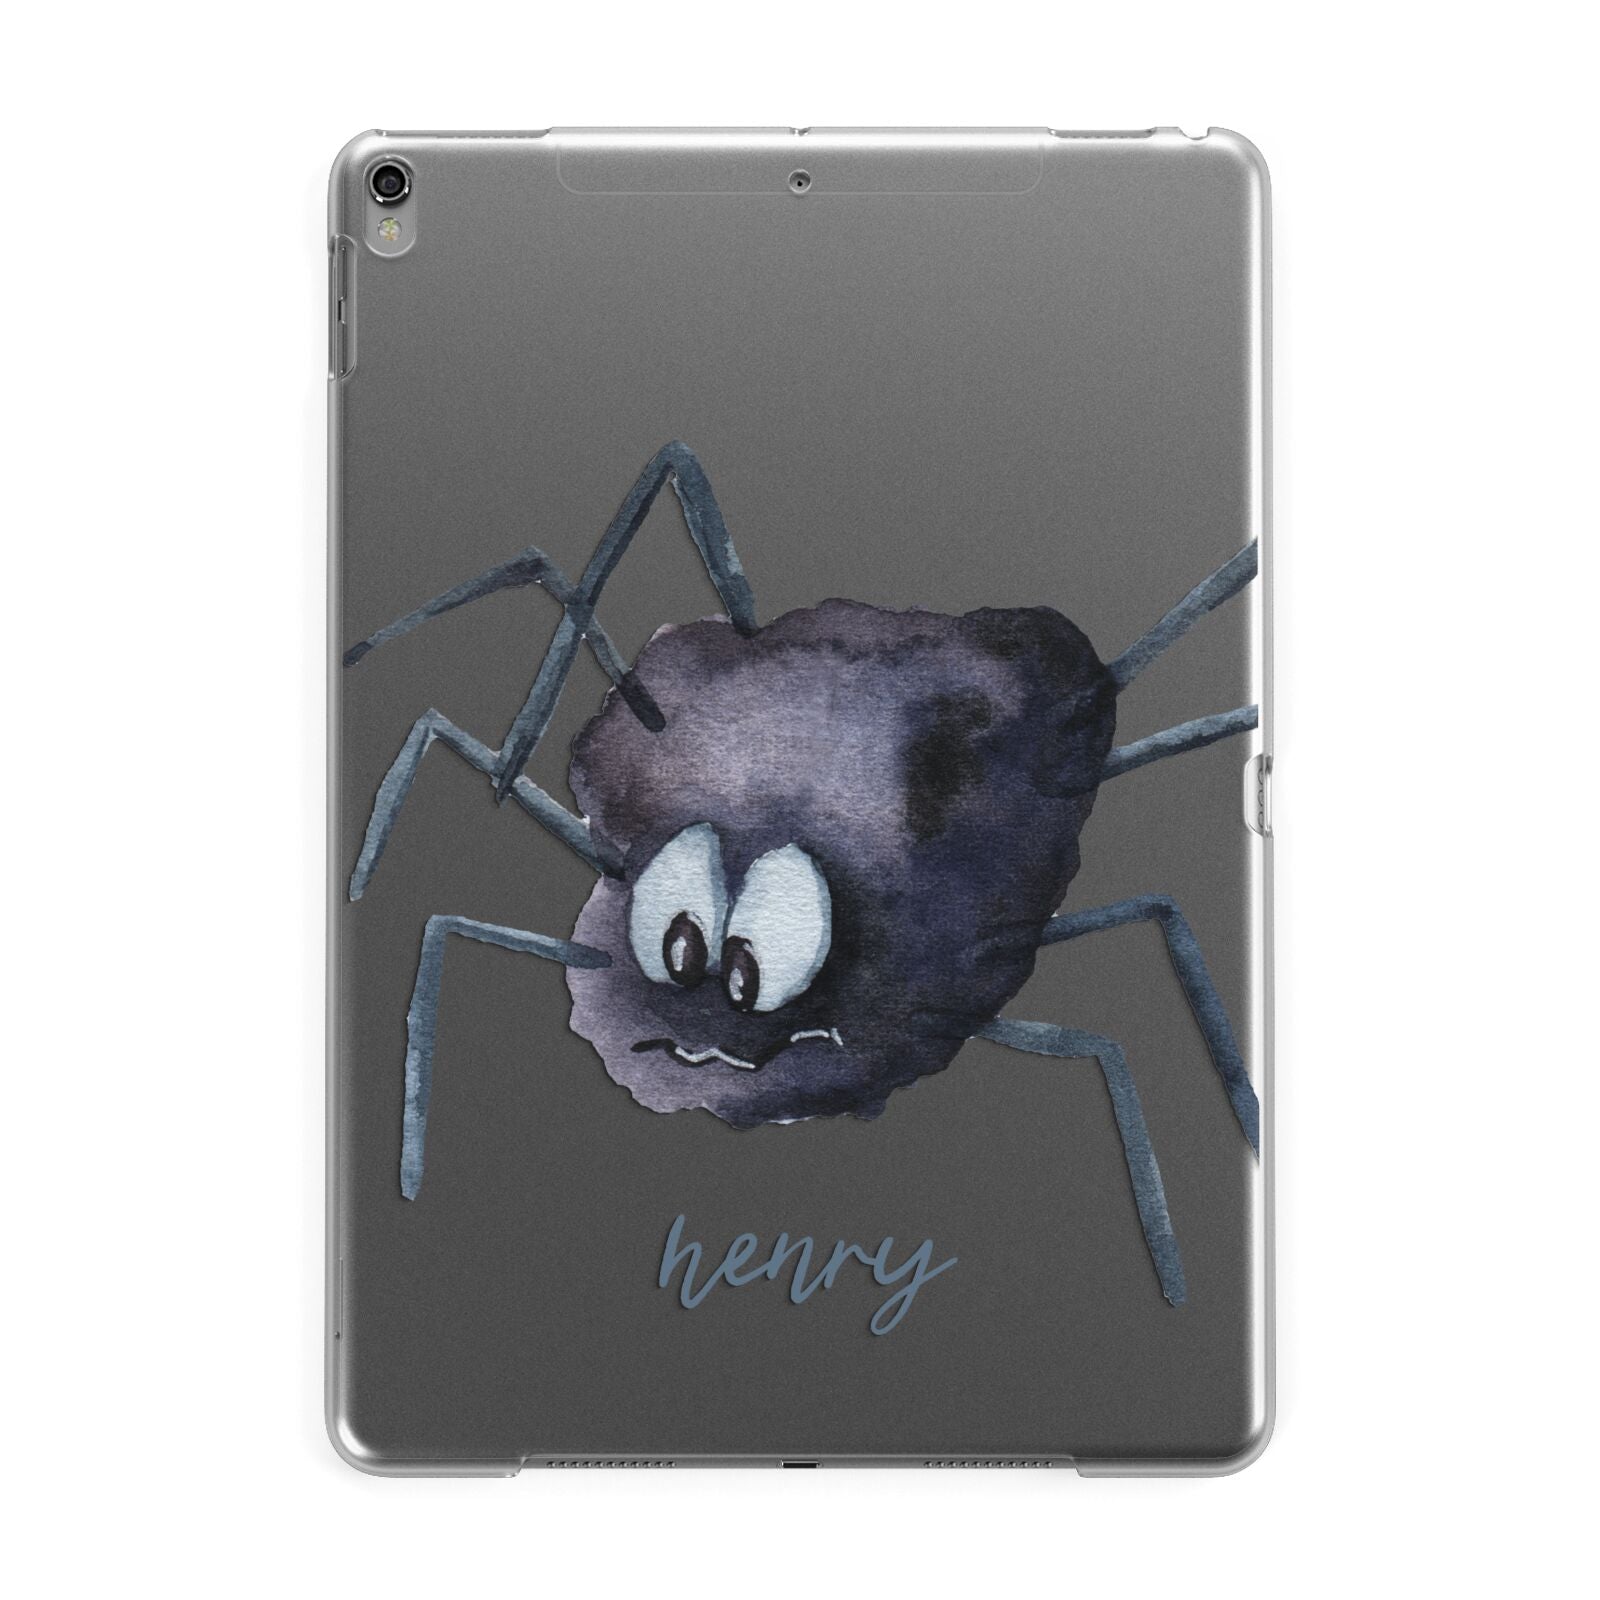 Scared Spider Personalised Apple iPad Grey Case